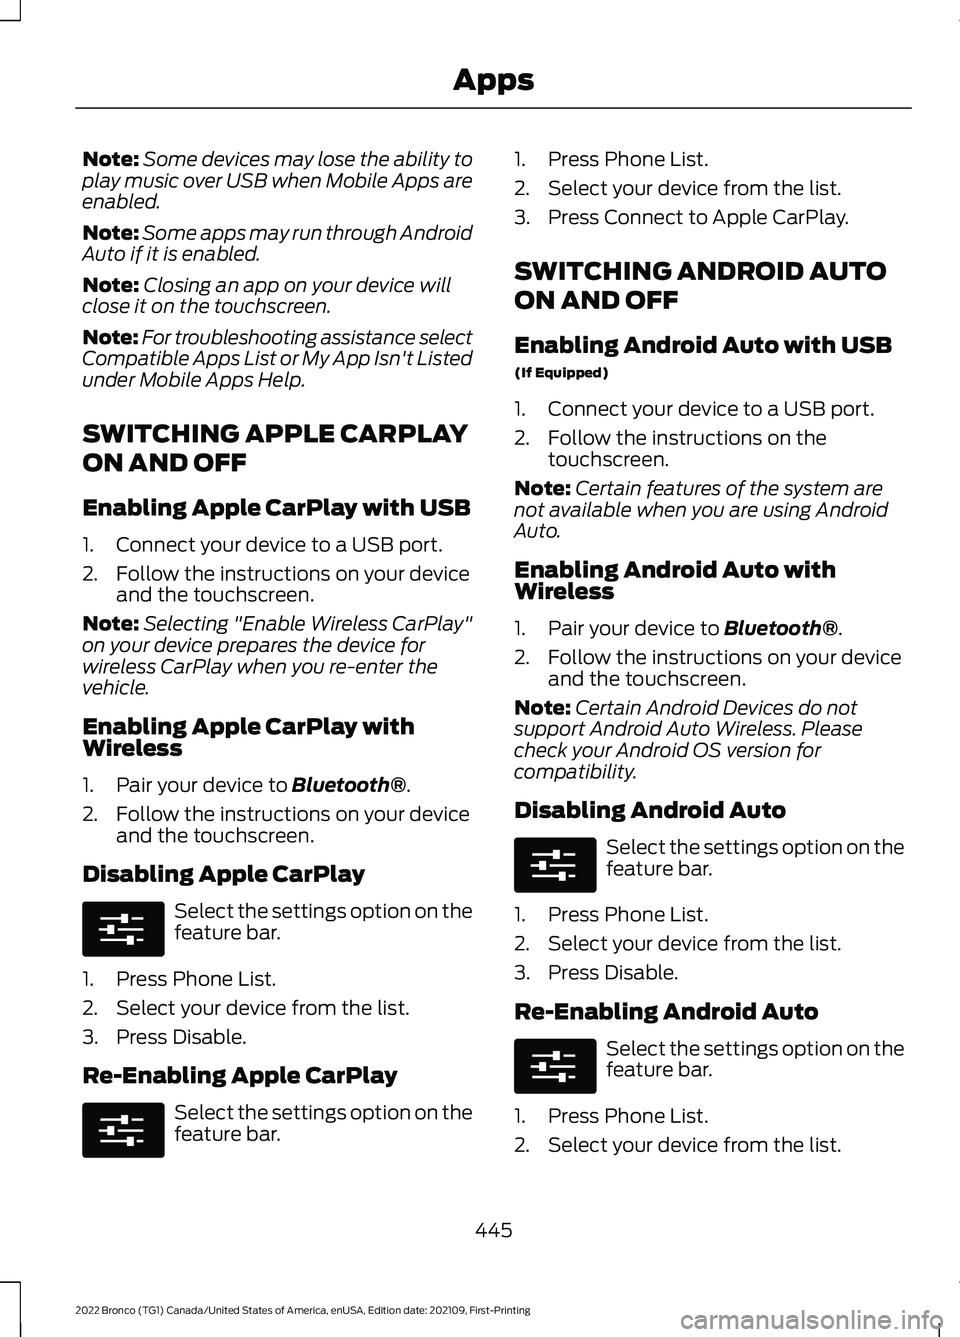 FORD BRONCO 2022 Service Manual Note:Some devices may lose the ability toplay music over USB when Mobile Apps areenabled.
Note:Some apps may run through AndroidAuto if it is enabled.
Note:Closing an app on your device willclose it o